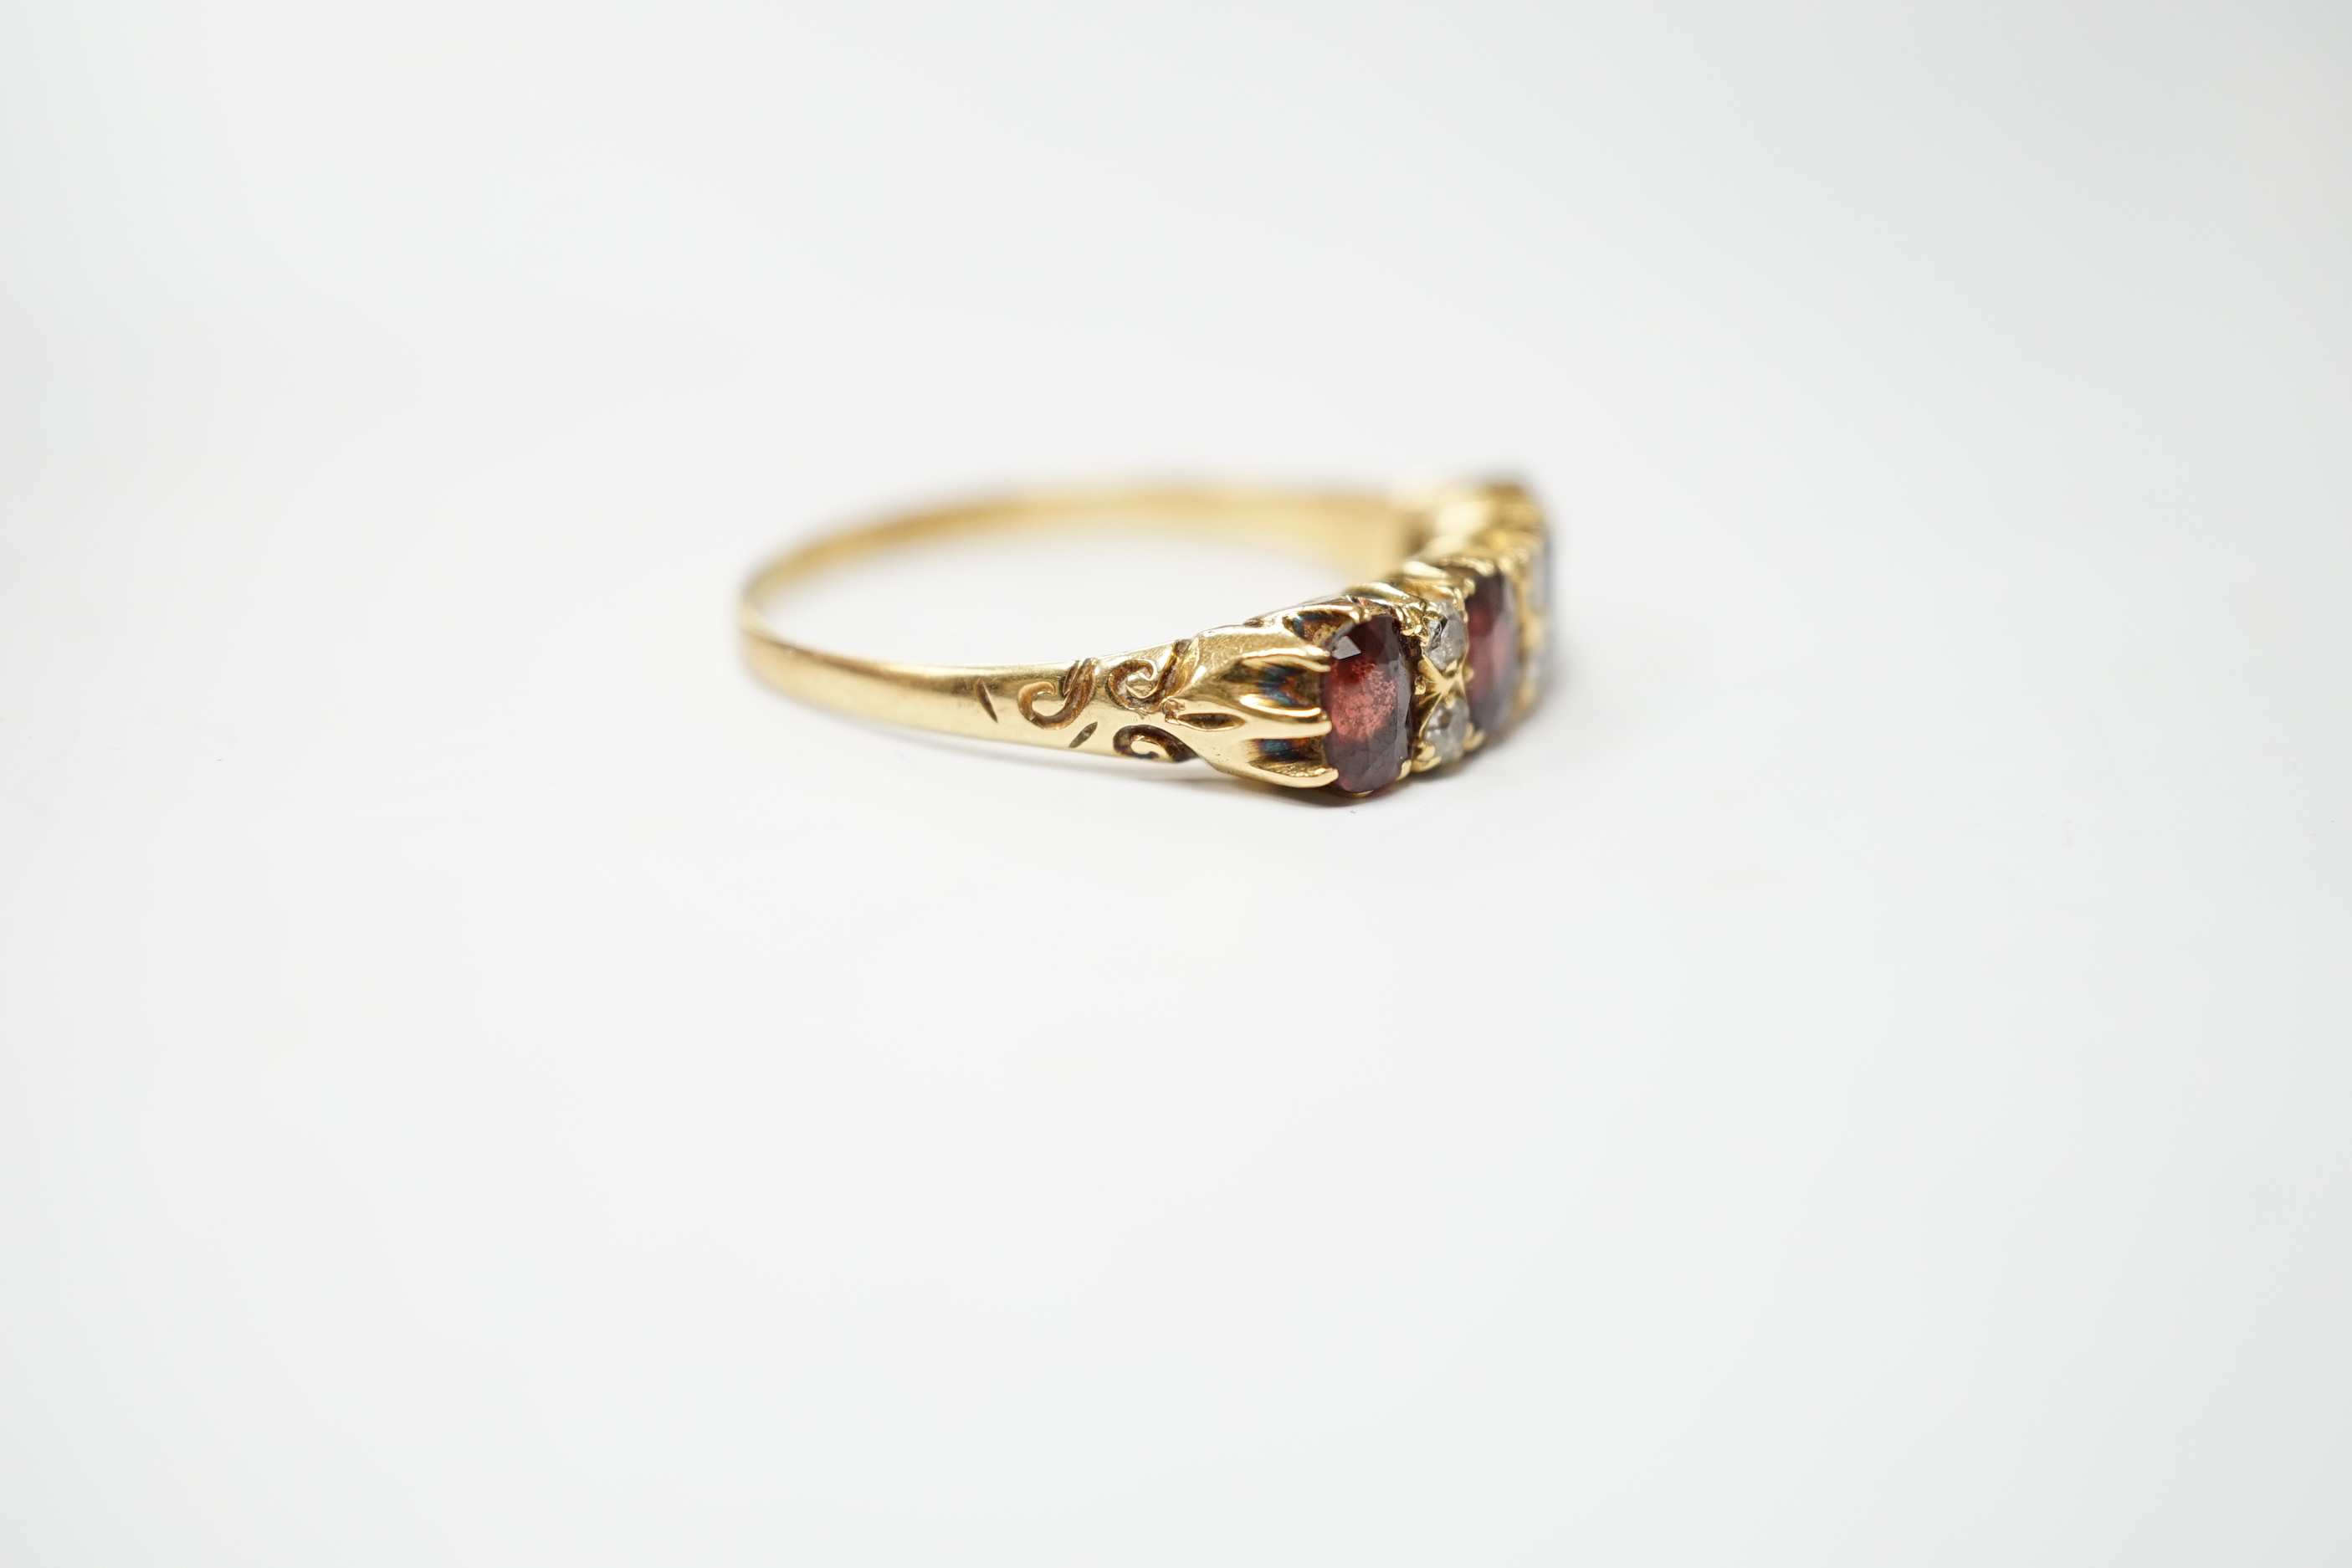 An Edwardian 18ct gold and four stone garnet set half hoop ring, with diamond chip spacers, size R, gross weight 3.6 grams.